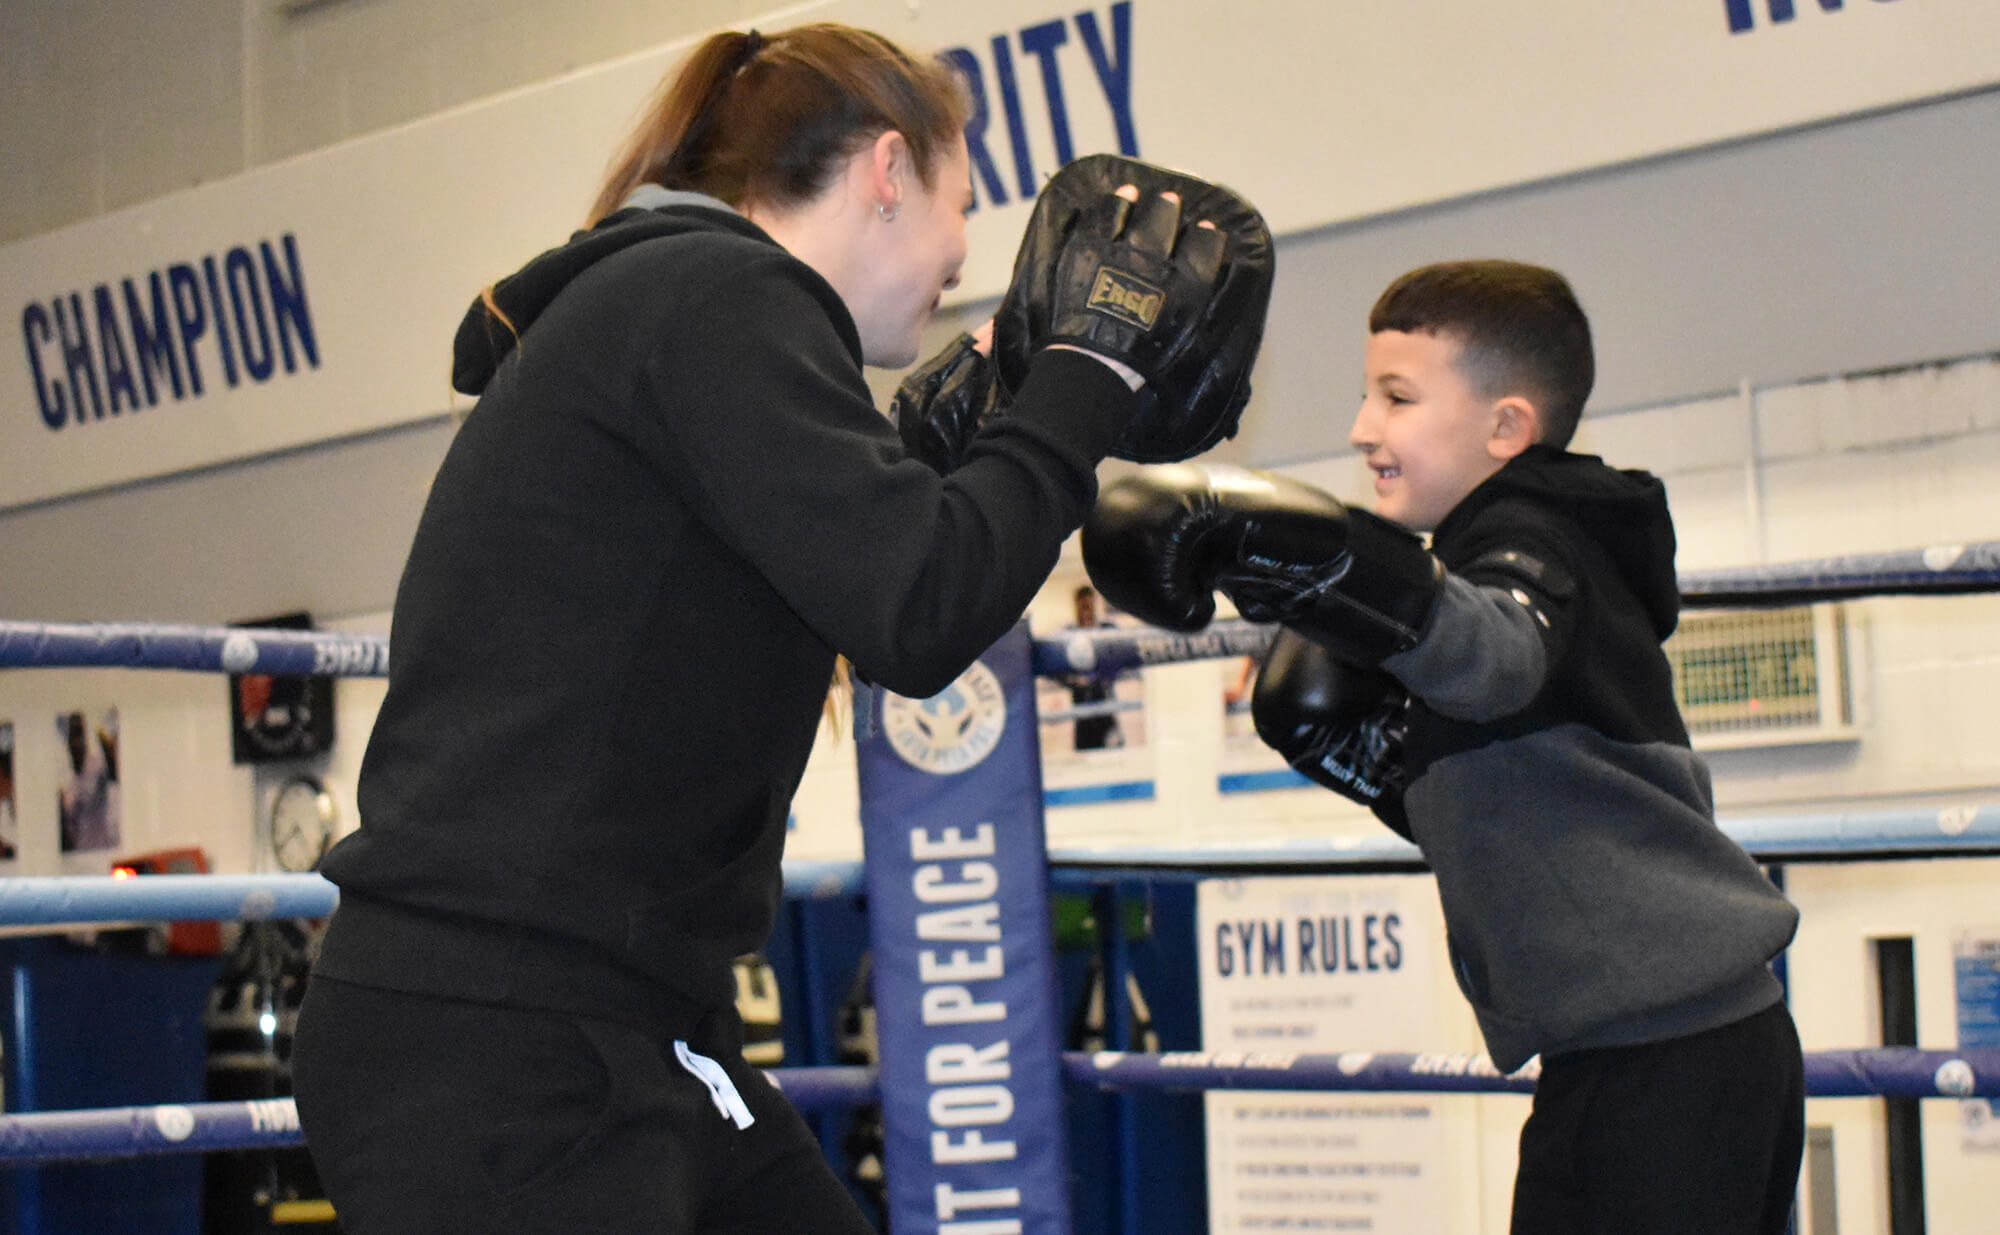 A young boxer delivers a jab on the pads during training with their coach in the ring